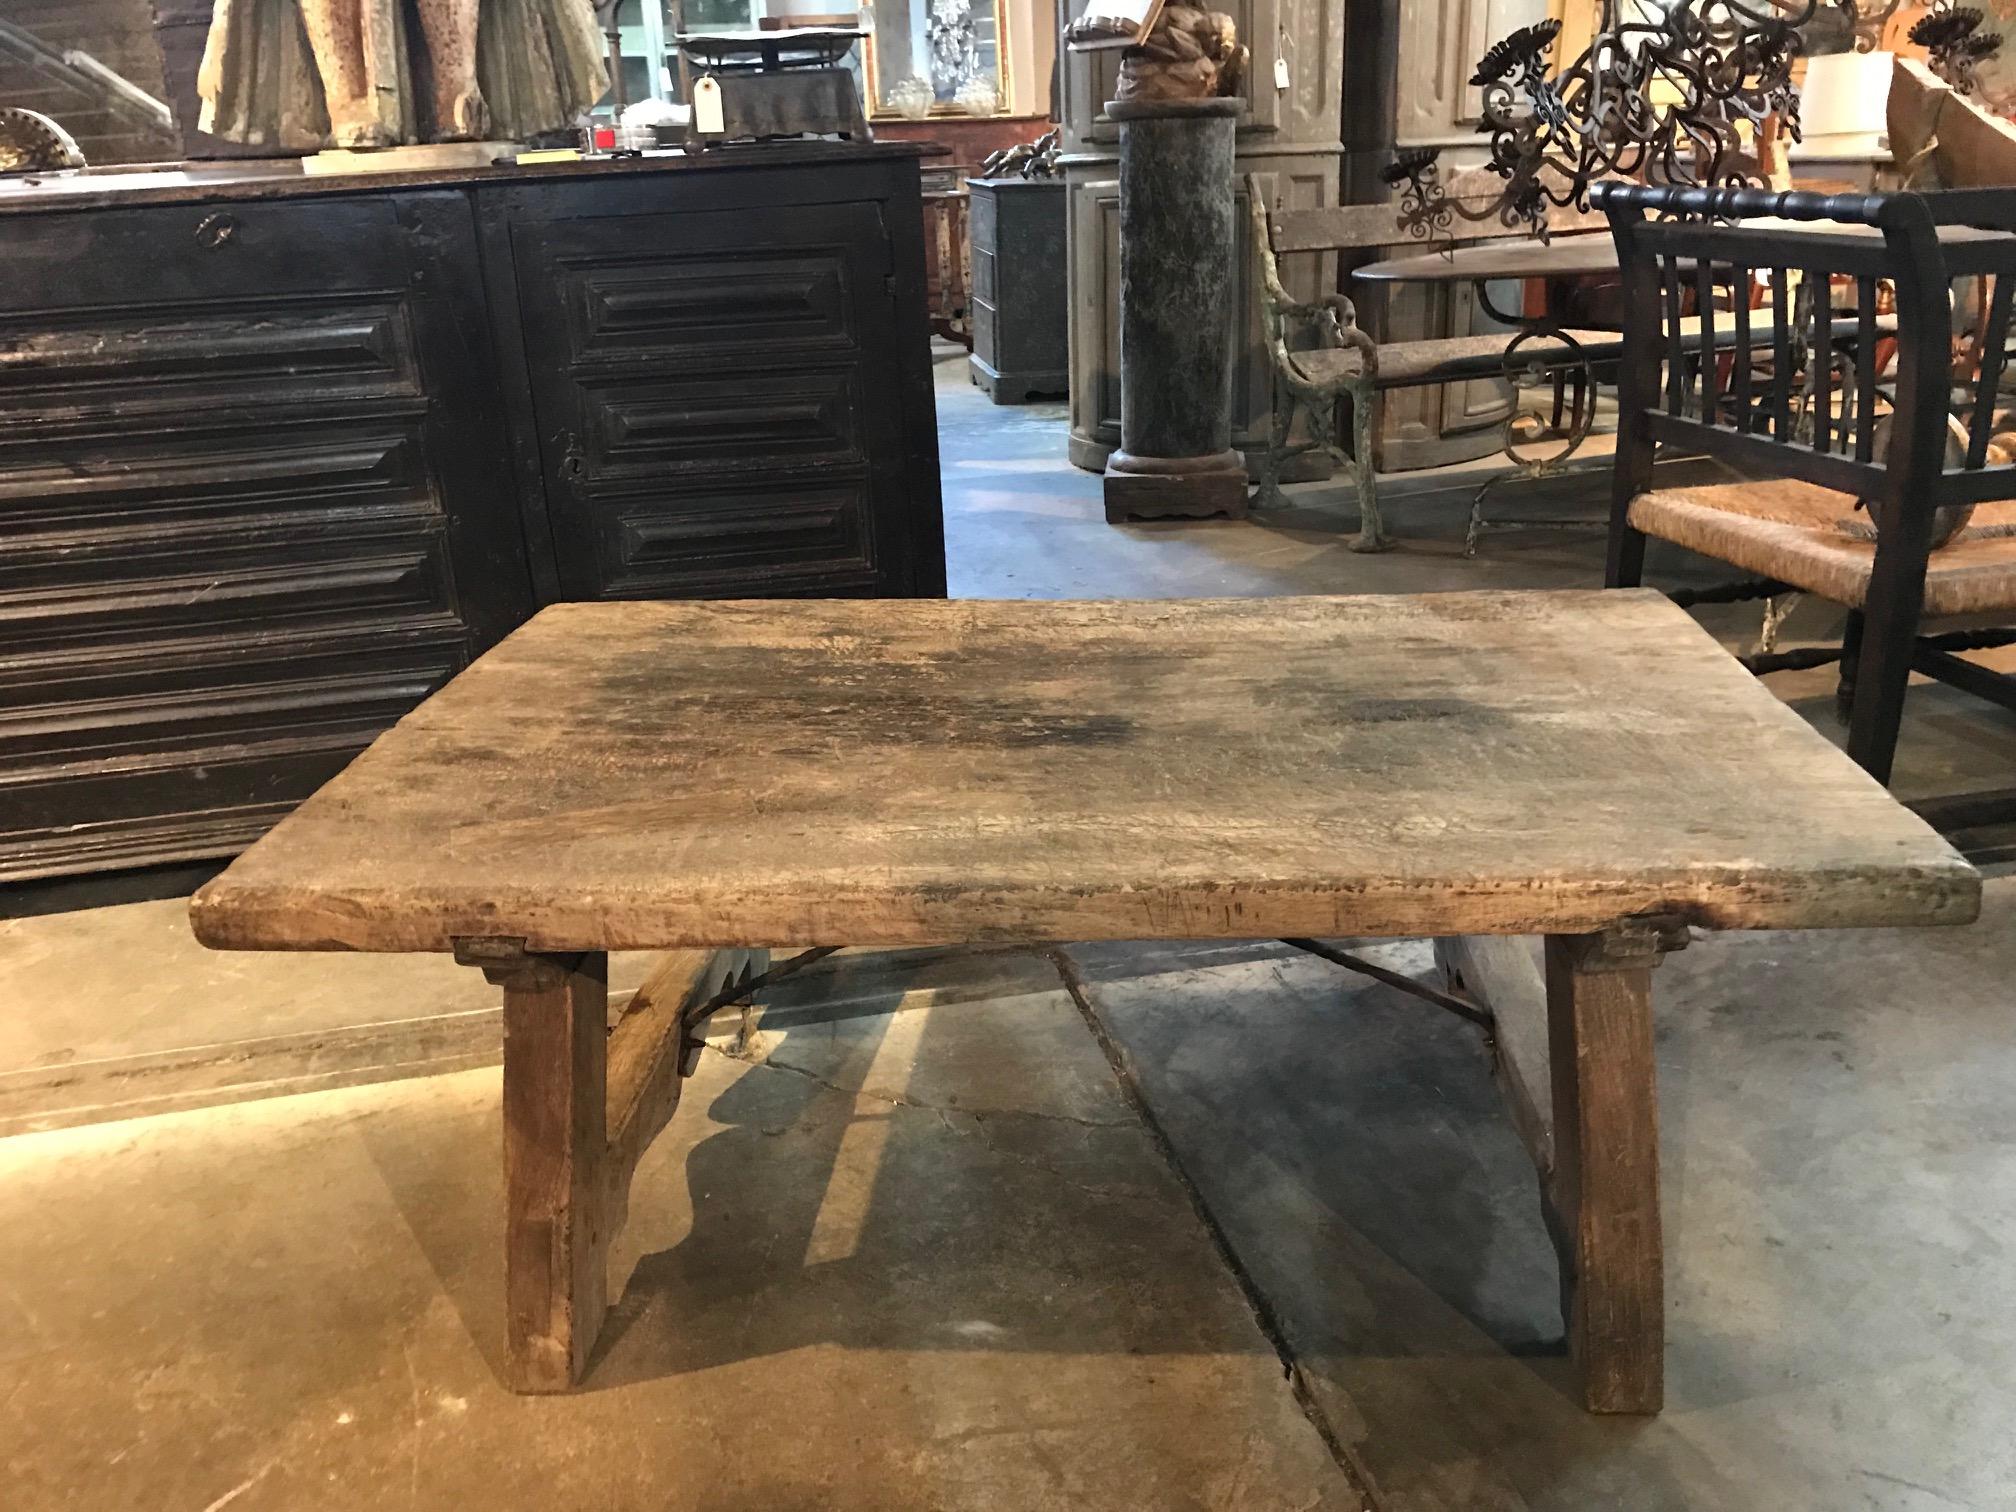 A very handsome and rustic 18th century low table, coffee table from the Catalan region of Spain. Wonderfully constructed from beech wood with a solid board top and hand-forged iron stretchers.